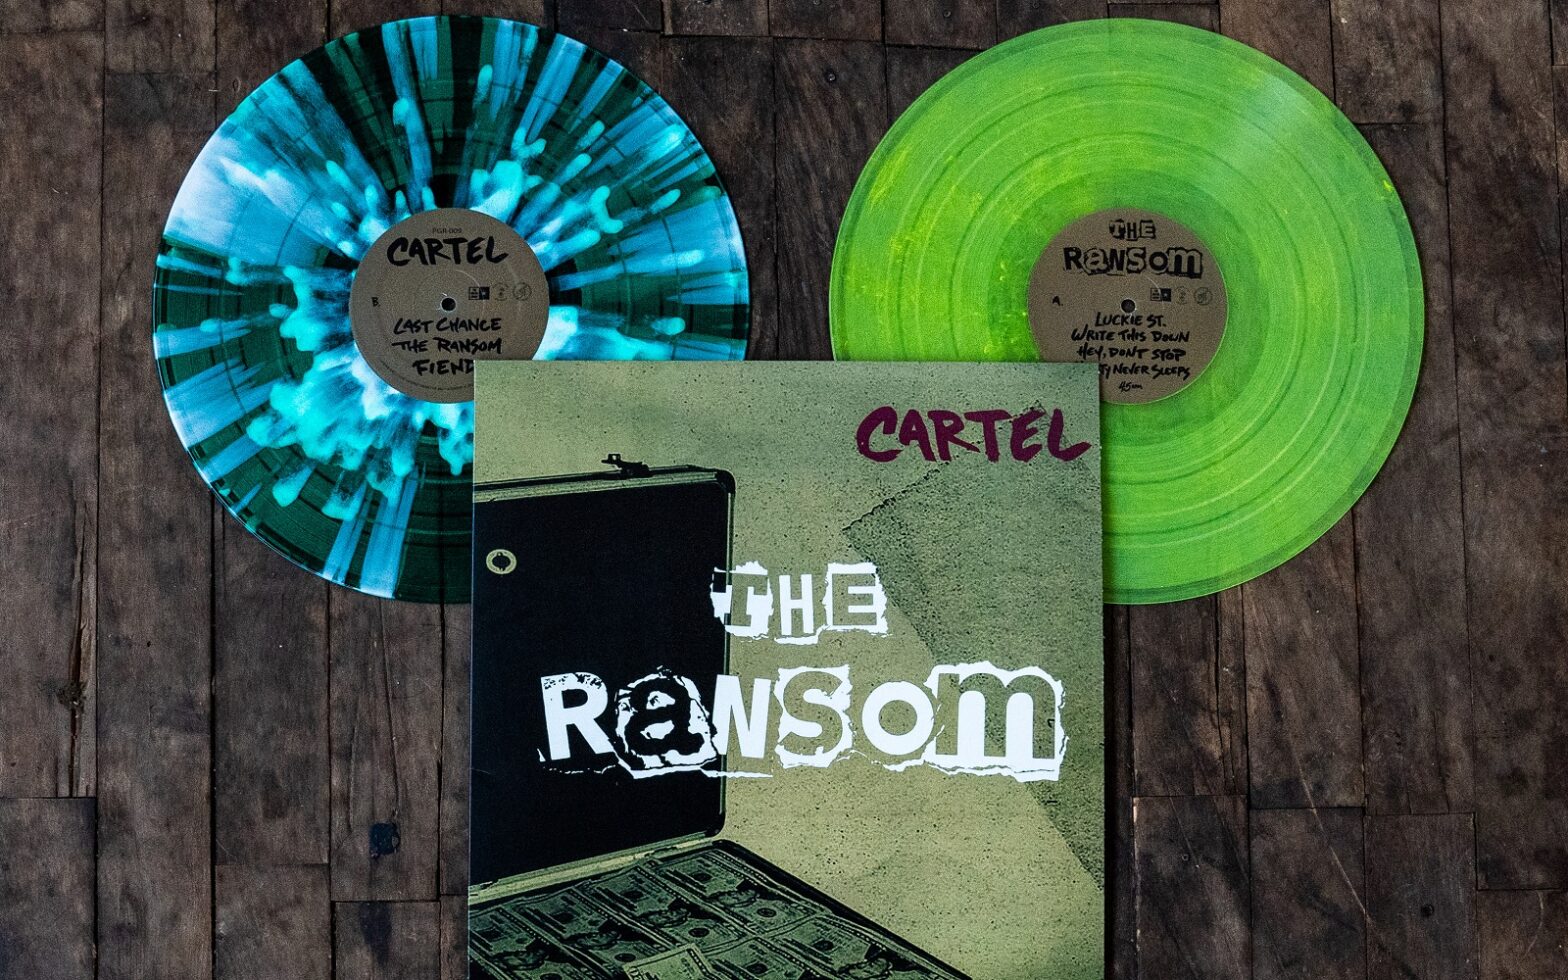 Ransom Cartel and REvil